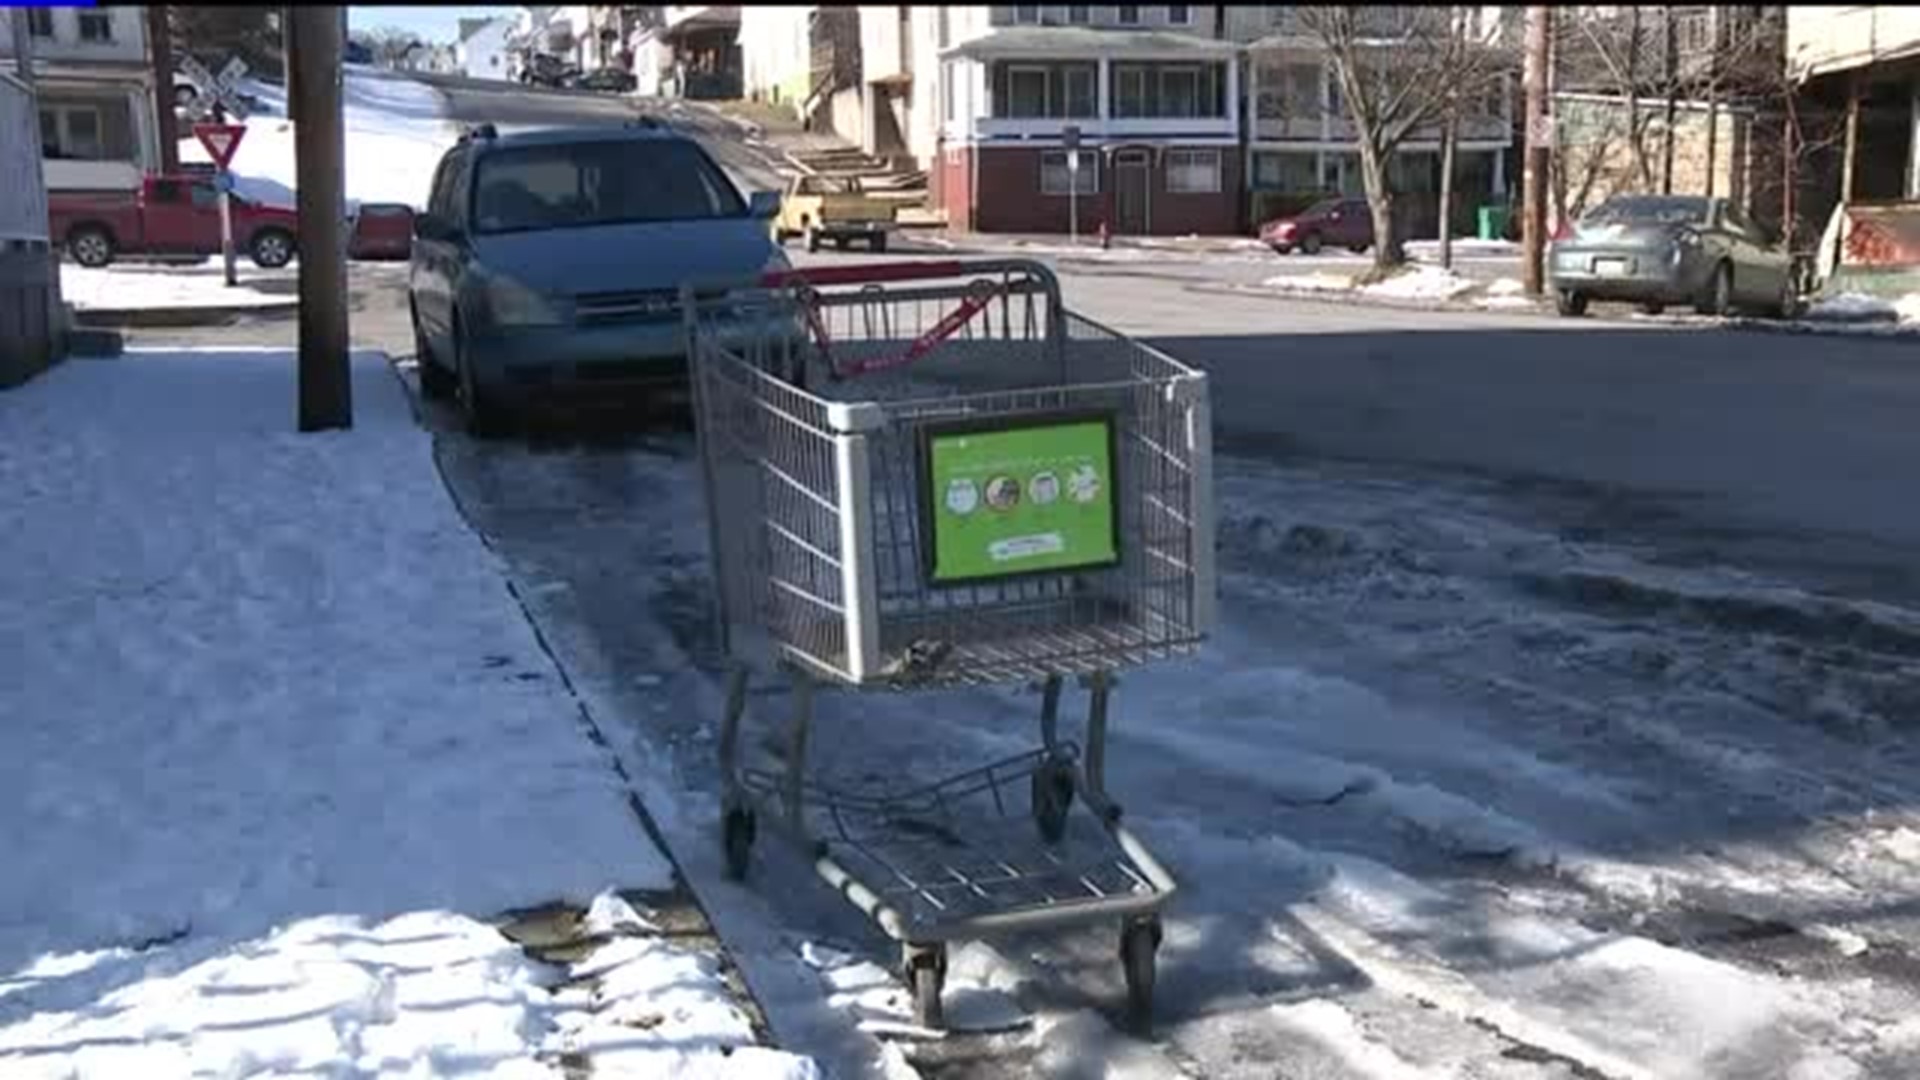 New Security System Keeps Shopping Carts at Store